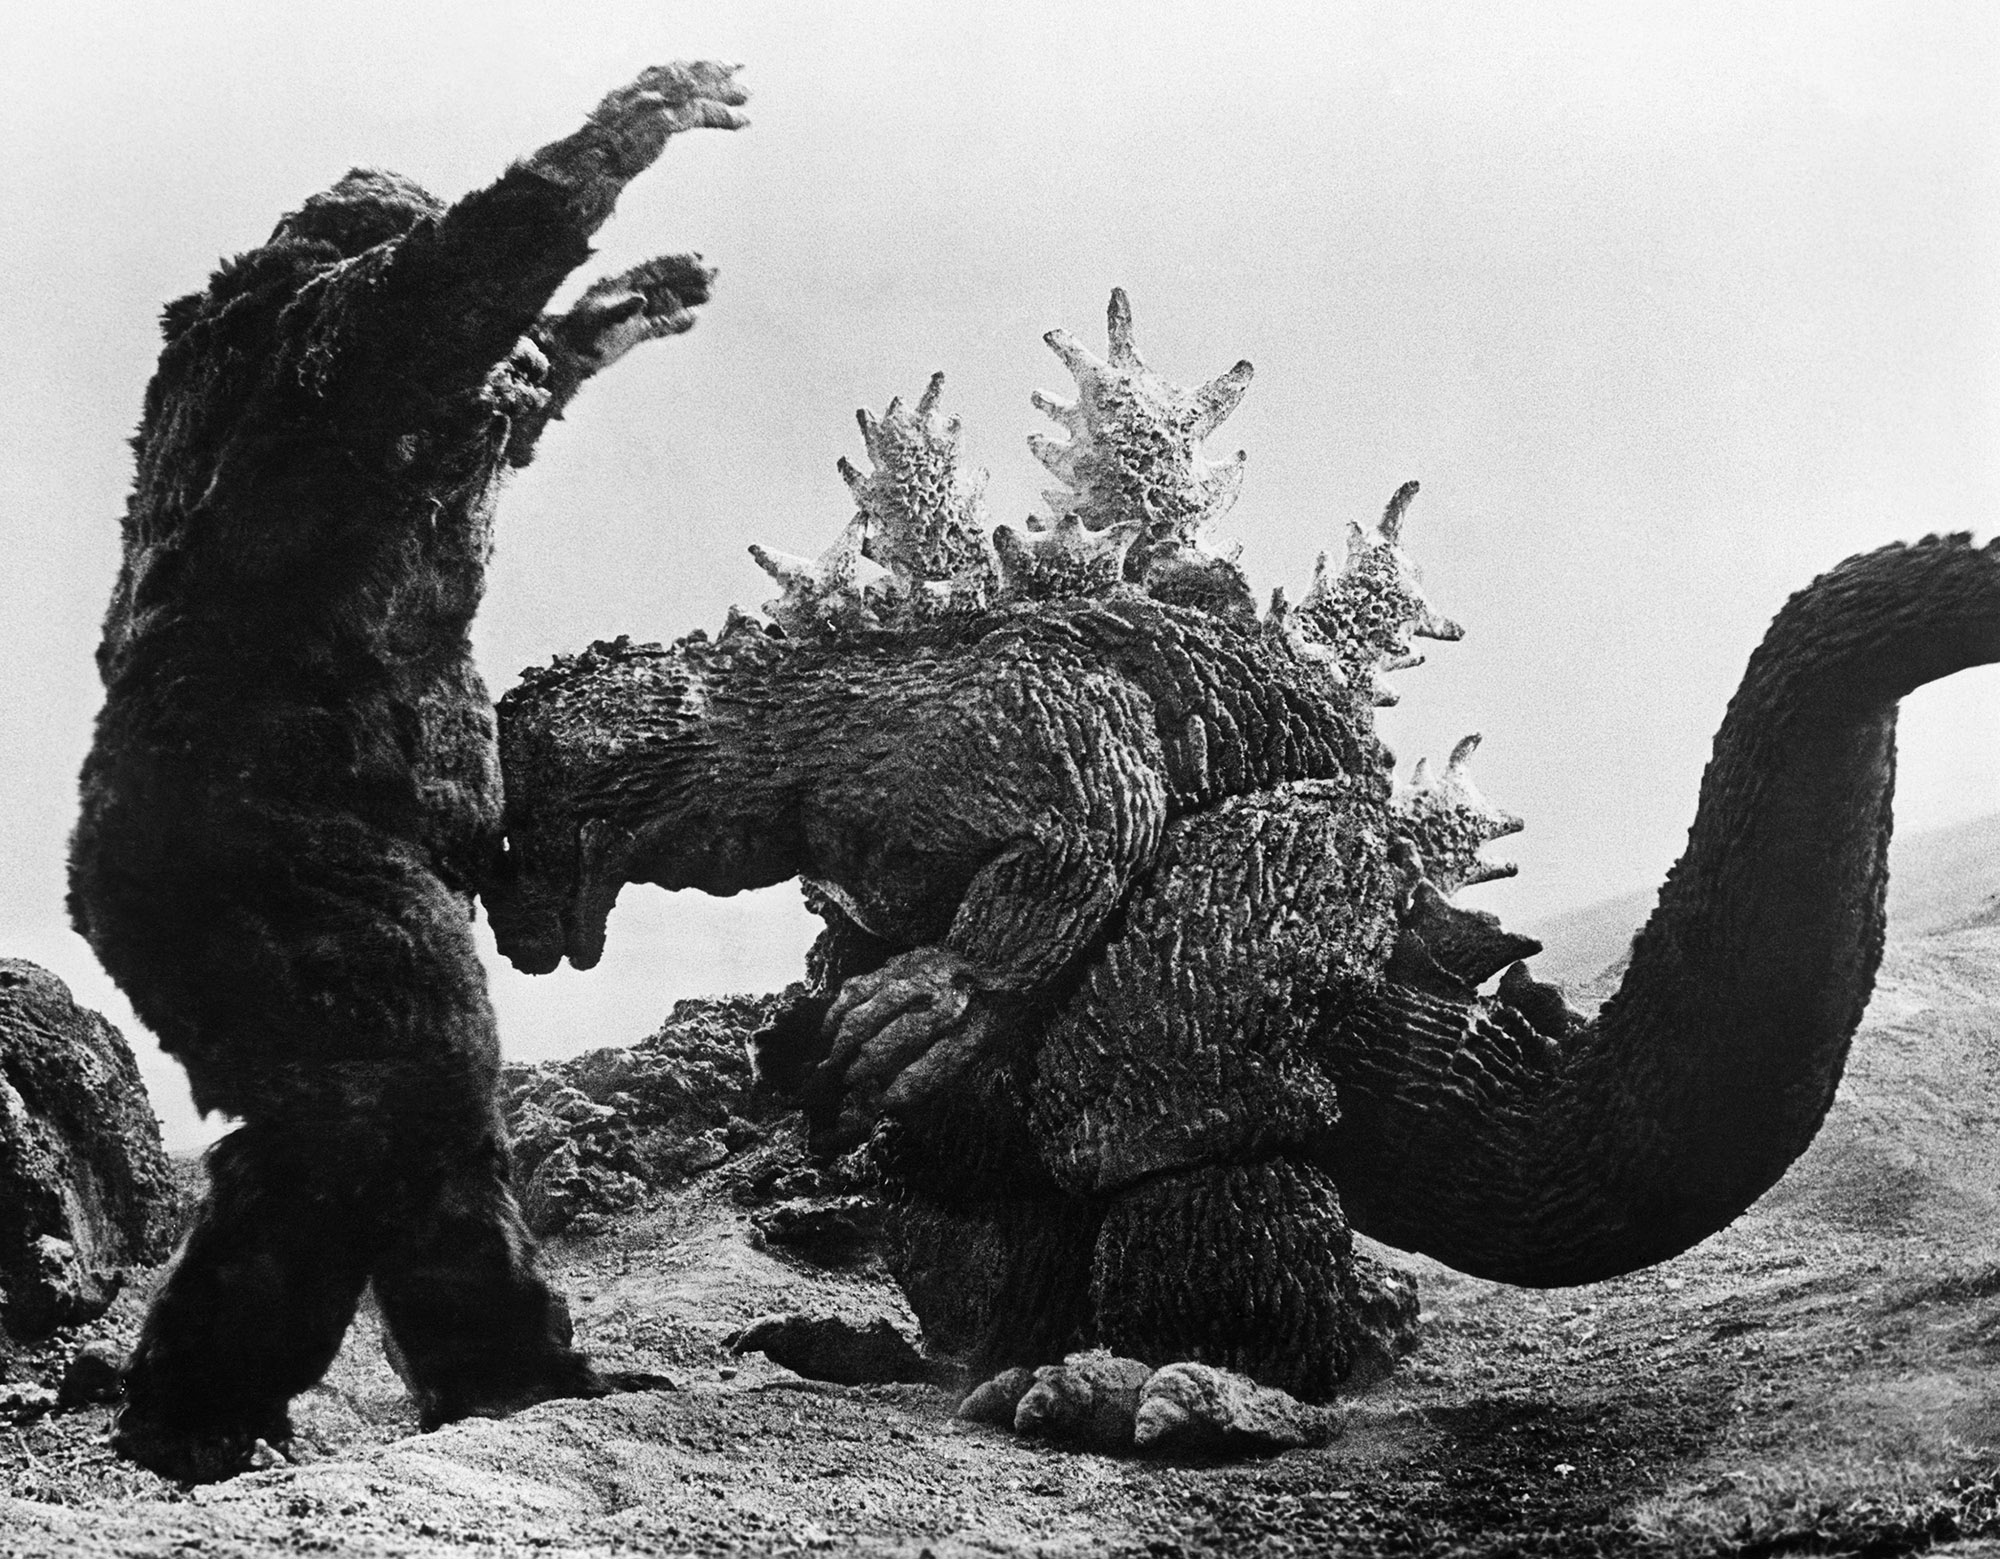 black and white still from the 1962 movie "King Kong vs. Godzilla." The title monsters are fighting, with Kong on the left, standing with his arms in the air as he is being knocked back by Godzilla, who is bent forward and head-butting Kong in the chest.